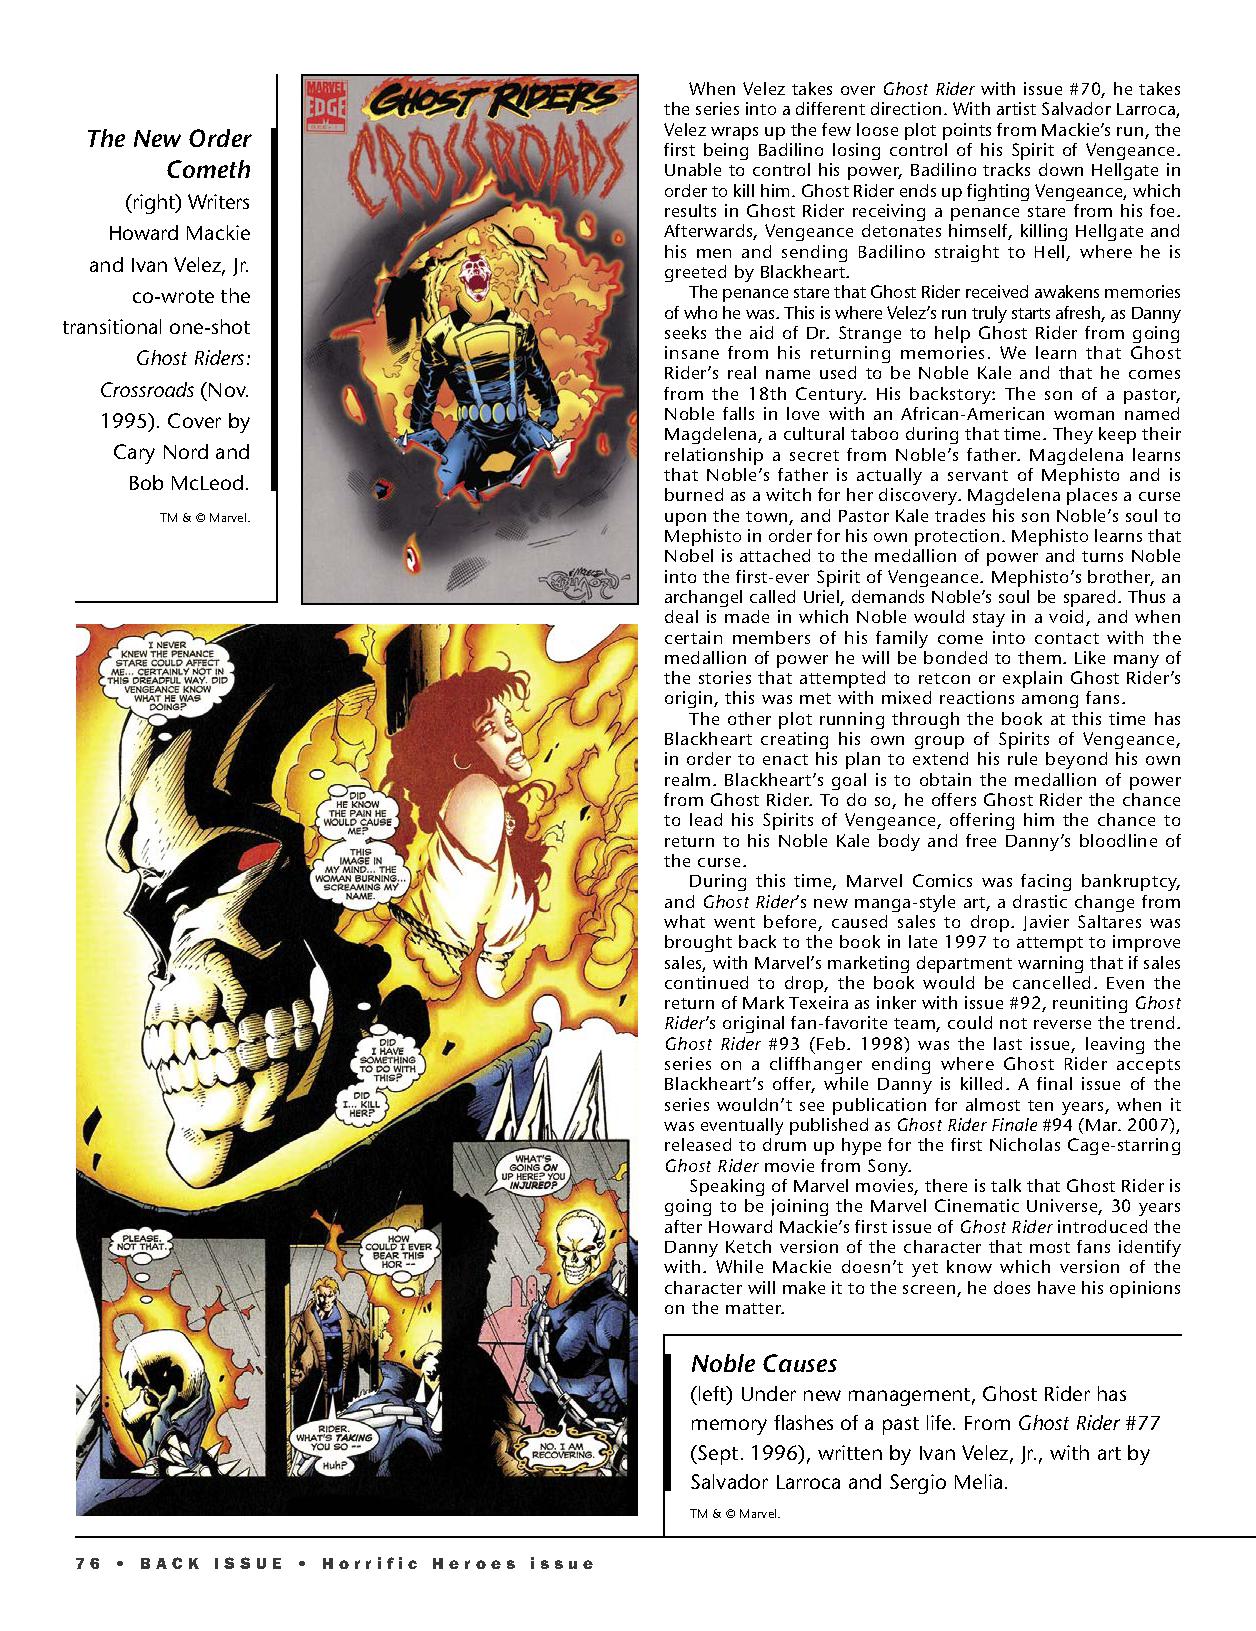 Read online Back Issue comic -  Issue #124 - 78